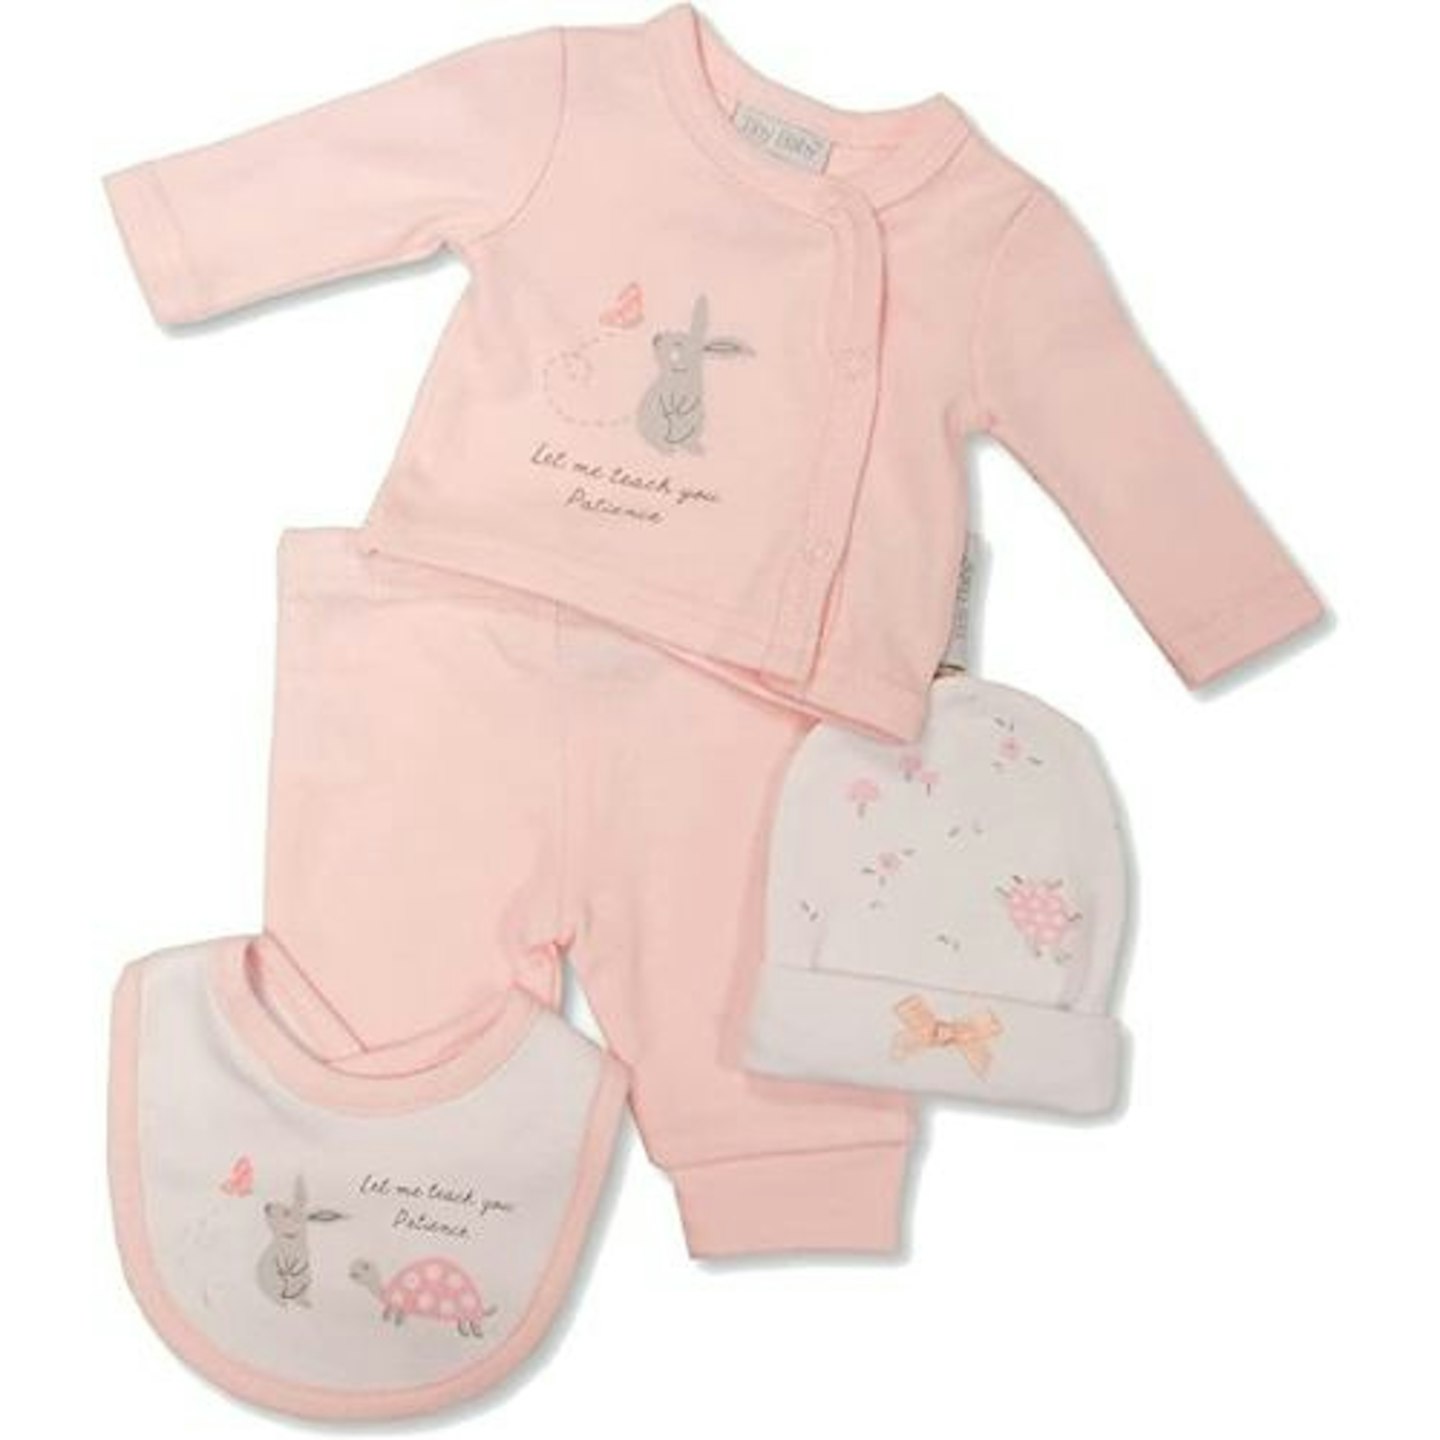 Premature & Tiny Baby Boys & Girls Outfit Set, Layette Gift Set